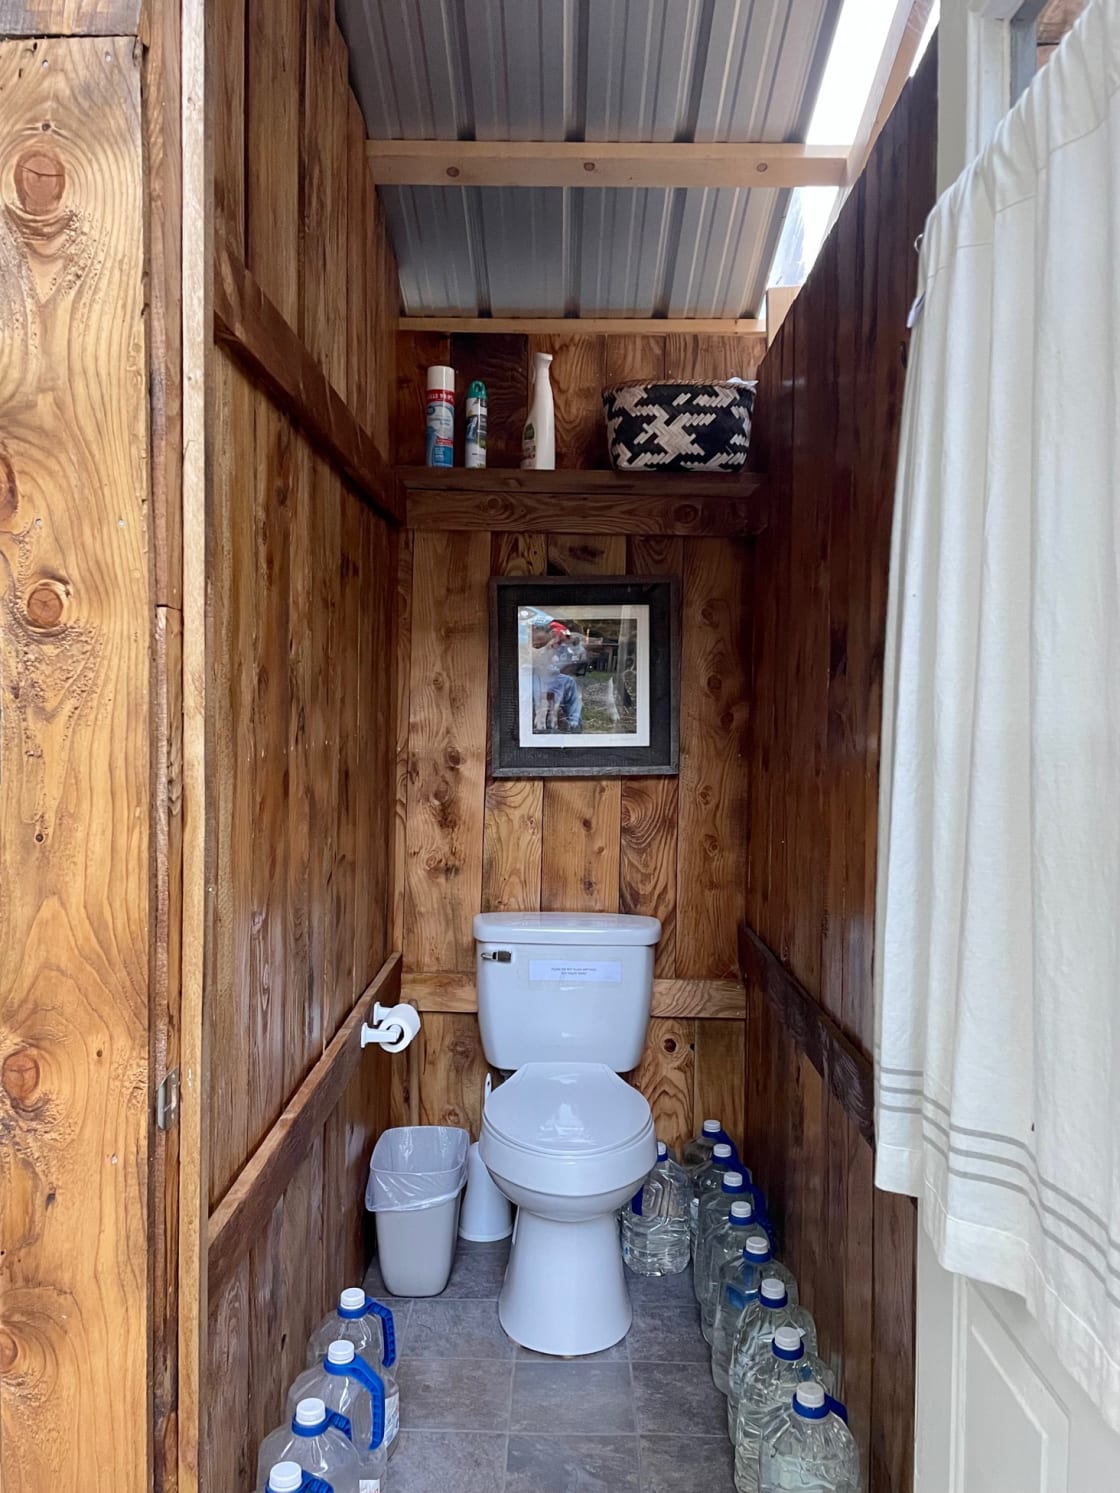 A flush toilet in the woods is here!